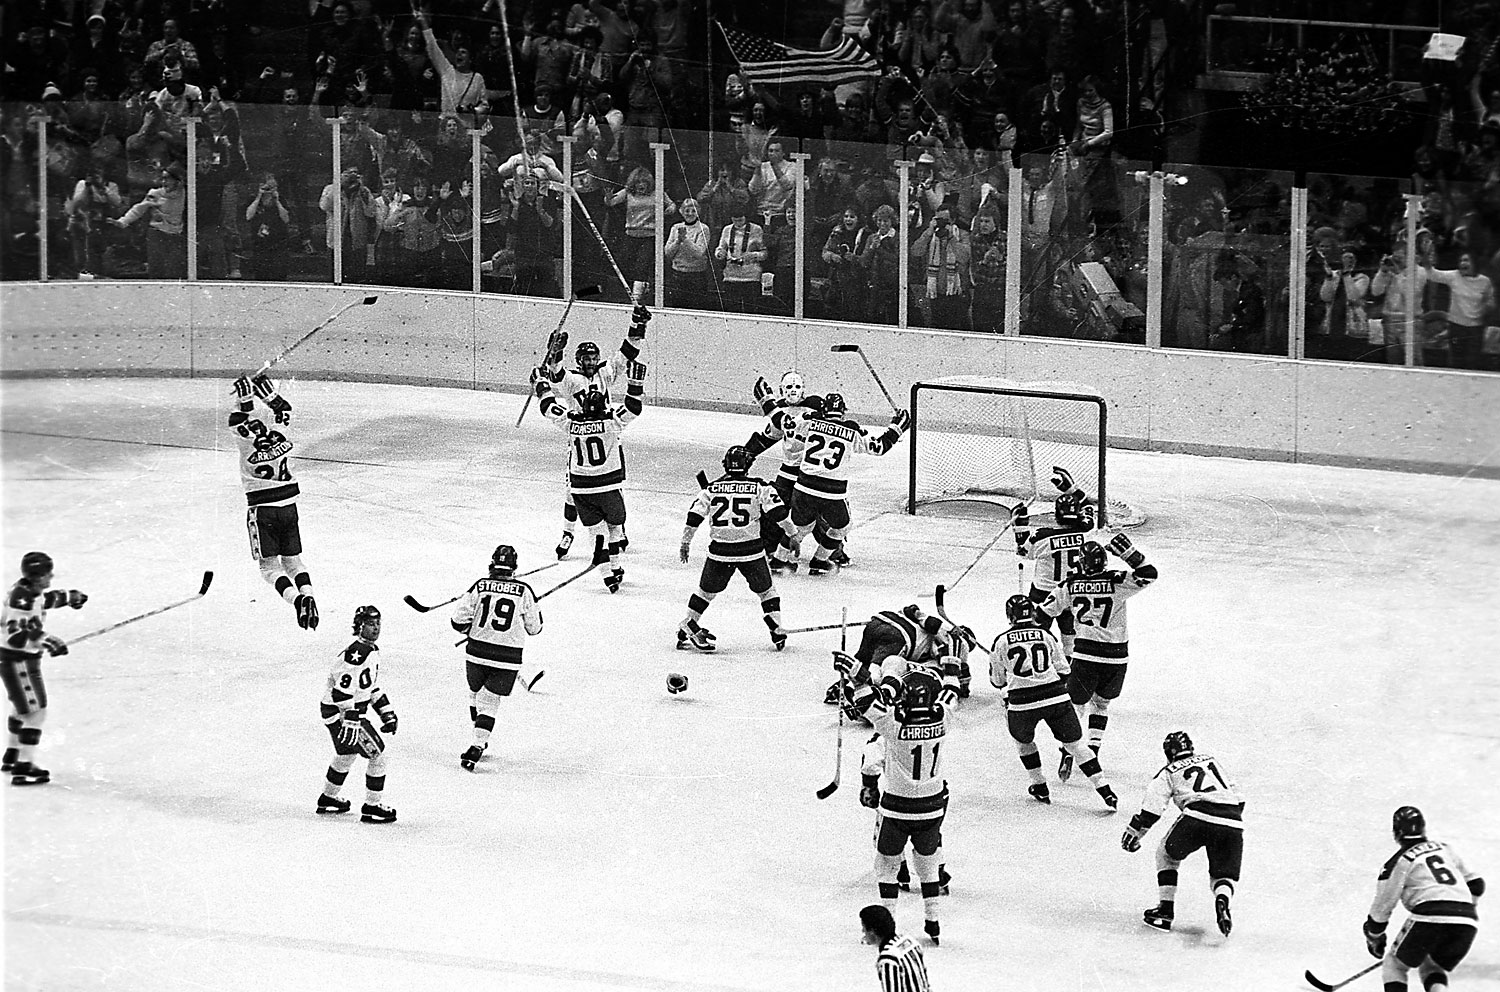 The U.S ice hockey team rushes toward goalie Jim Craig after their upset win over the Soviet Union in the semi-final round of the XIII Winter Olympic Games in Lake Placid, N.Y., Feb. 22, 1980. (AP)